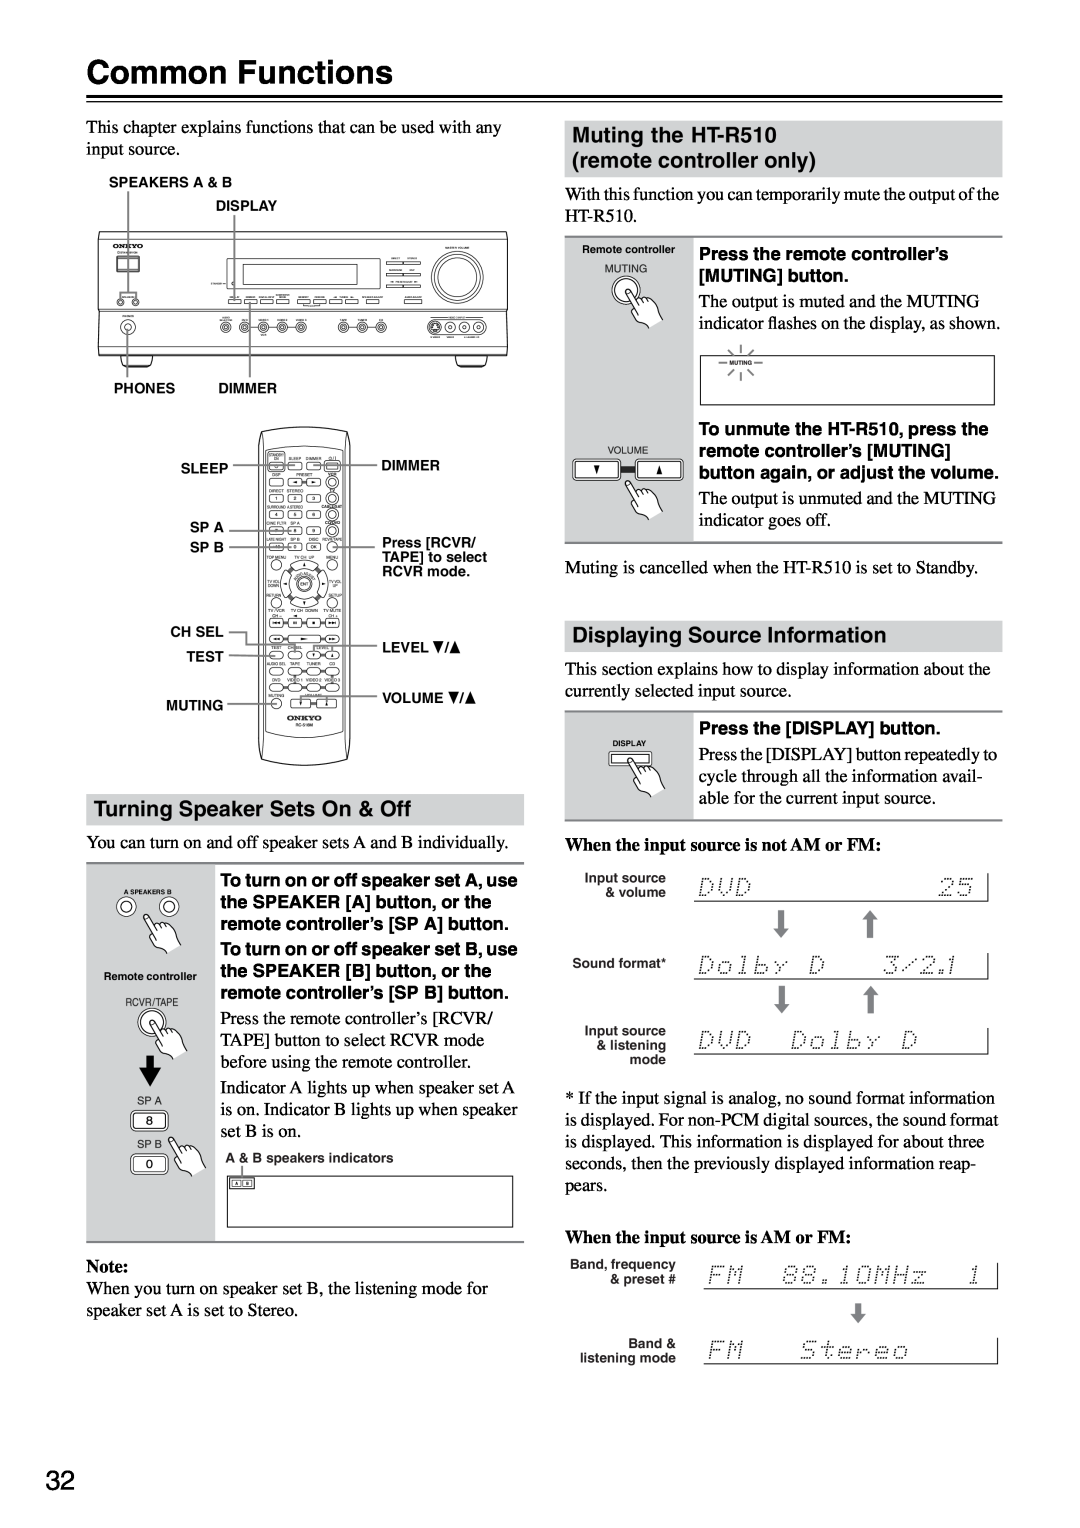 Onkyo instruction manual Common Functions, Turning Speaker Sets On & Off, Muting the HT-R510remote controller only 